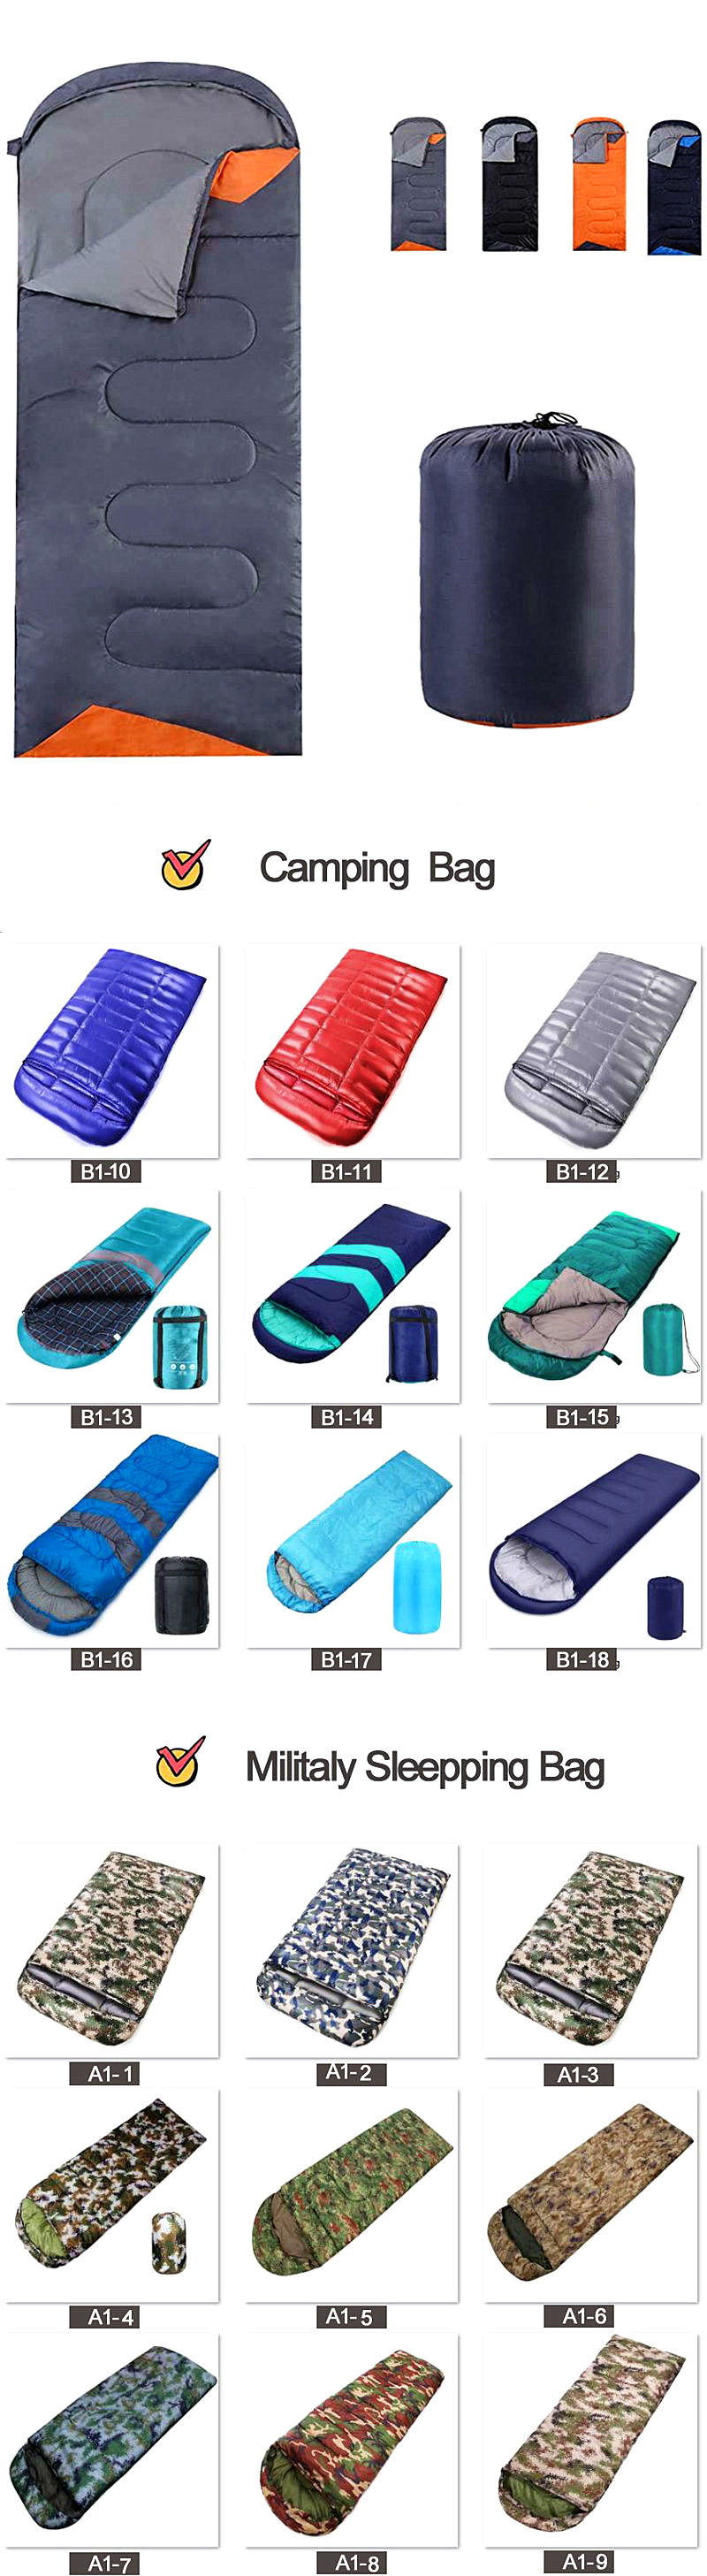 Warm Cold Weather Lightweight Waterproof Sleeping Bag With Compression Sack